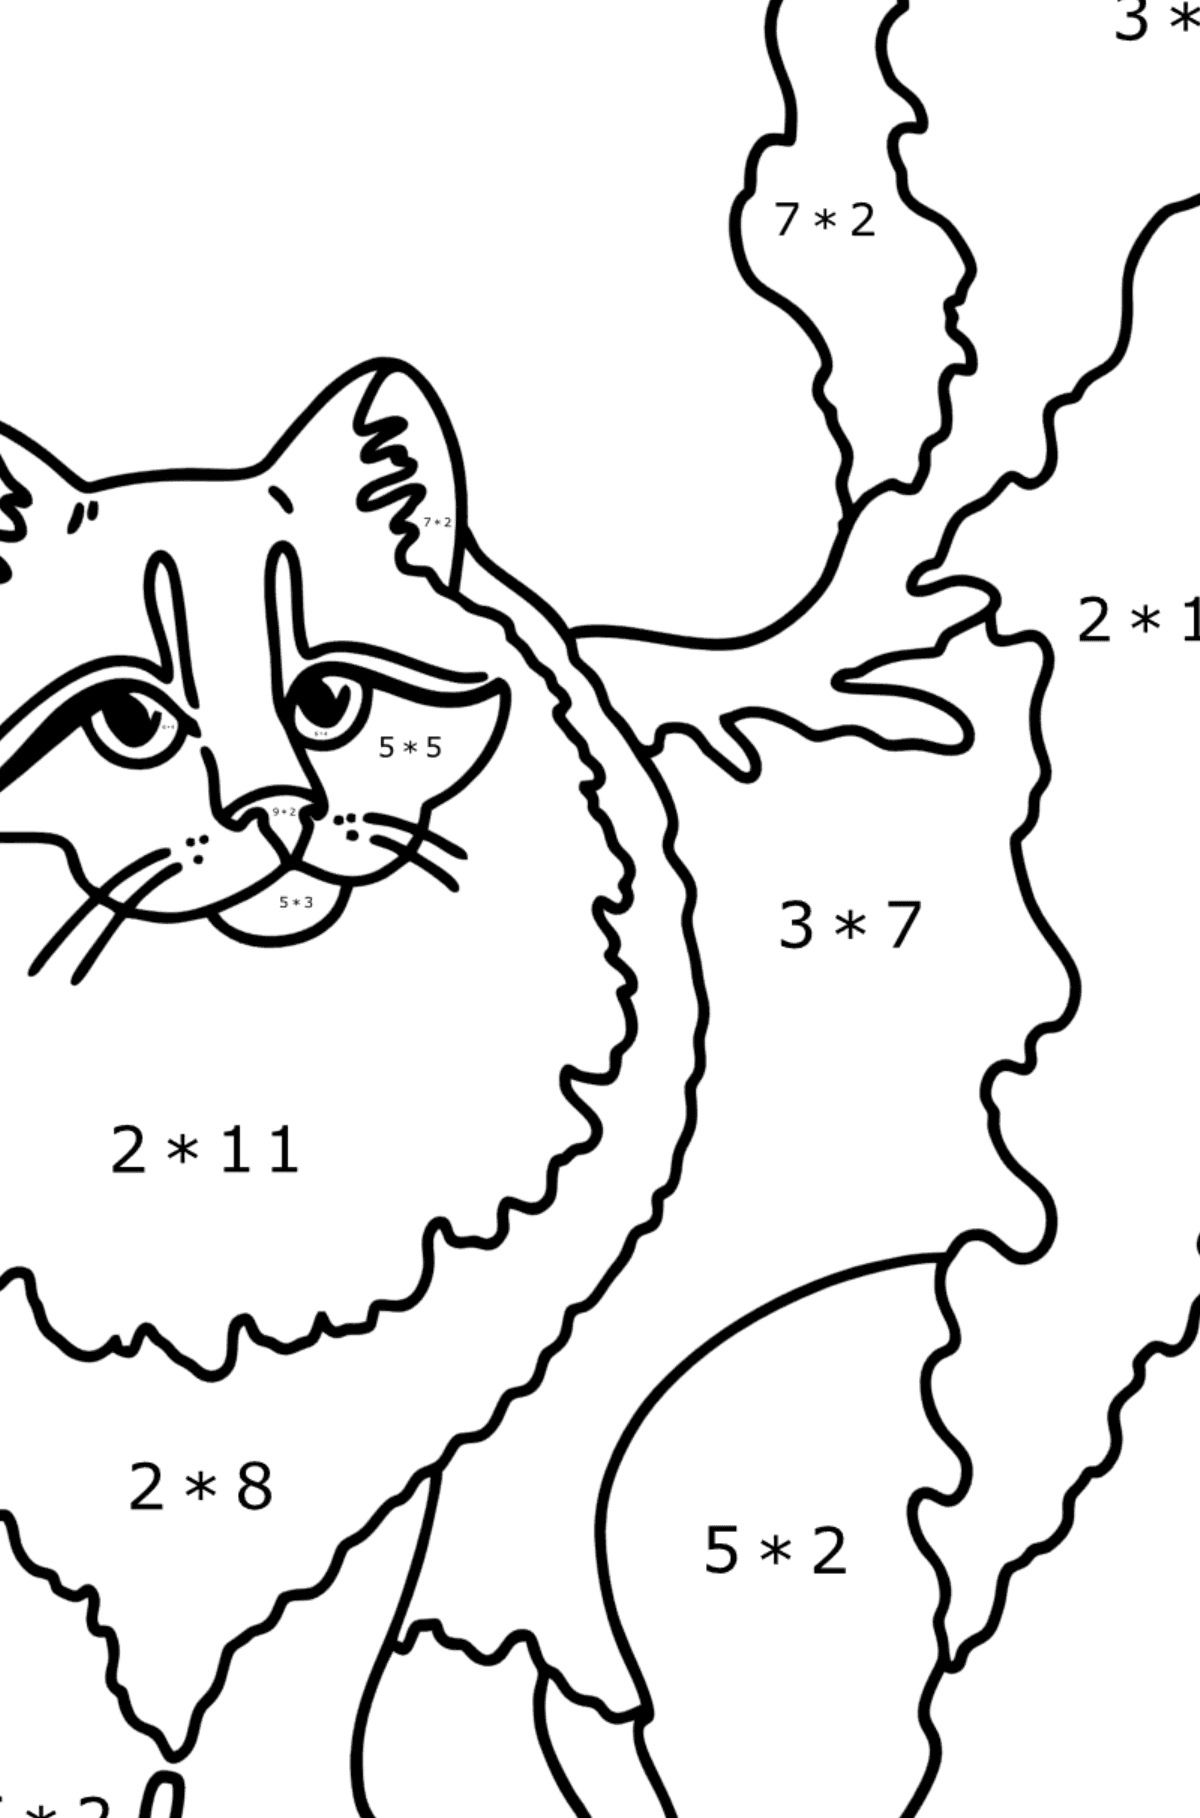 Siberian Cat coloring page - Math Coloring - Multiplication for Kids